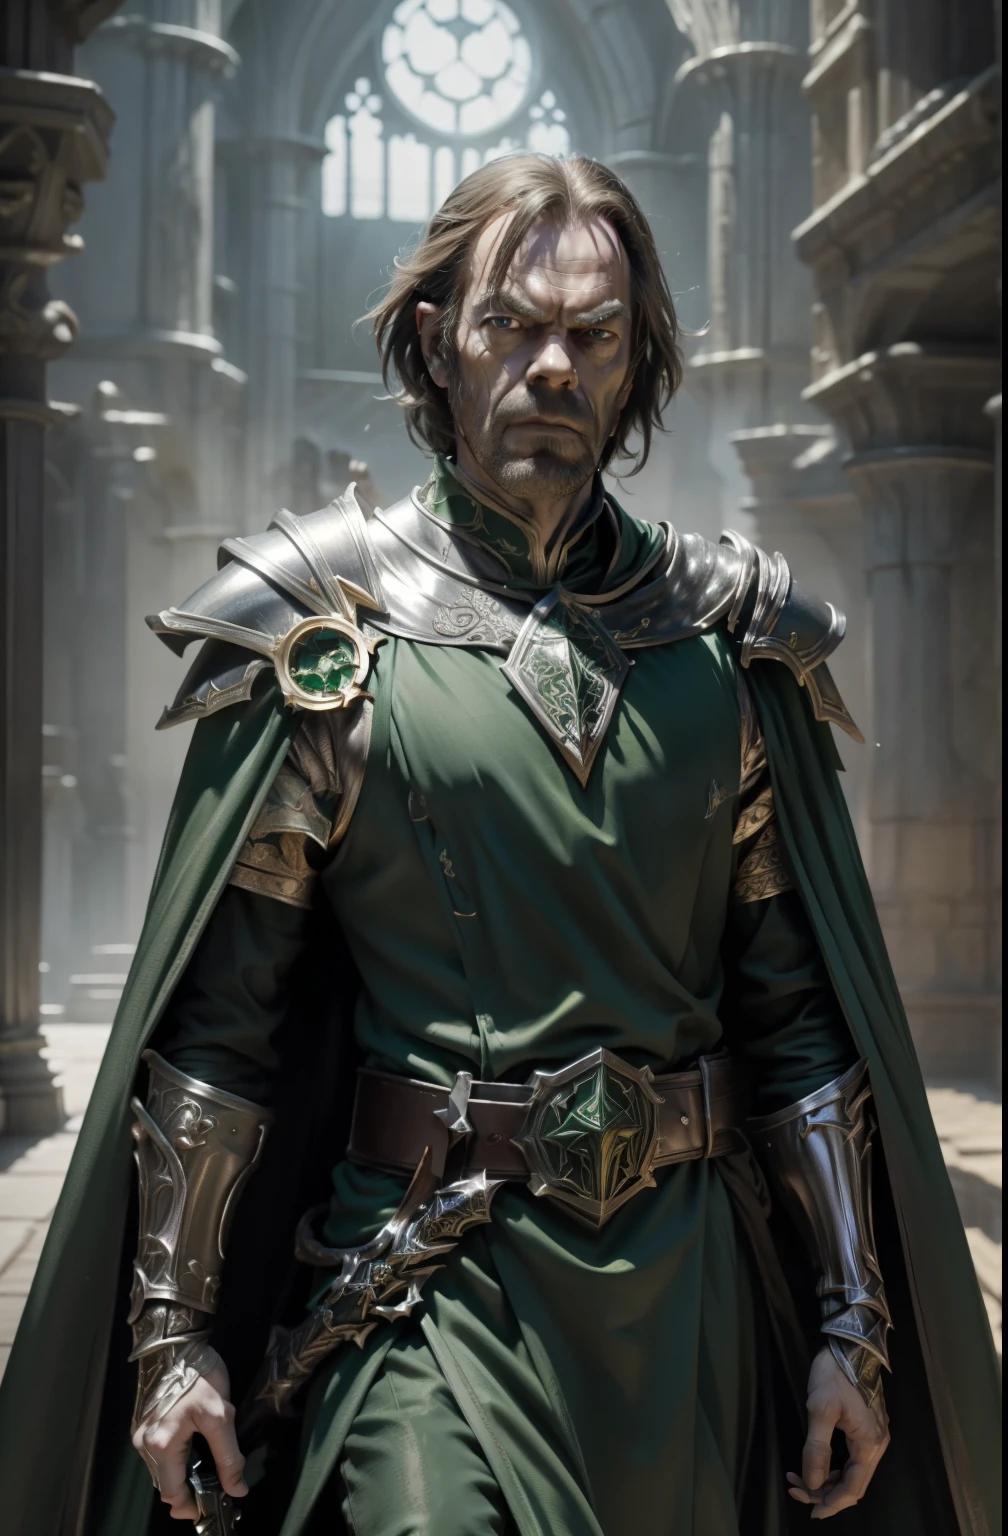 Hugo Weaving as high lord from the Warhammer universe, photorealistic, hd( lord: short hair, plate armor, nazgul silver-green cape, wide belt of Greenranger , holding weapon), renaissance gun pointing viewer,realistic fantasy, strong sense of three-dimensional by Chesley Bonestell